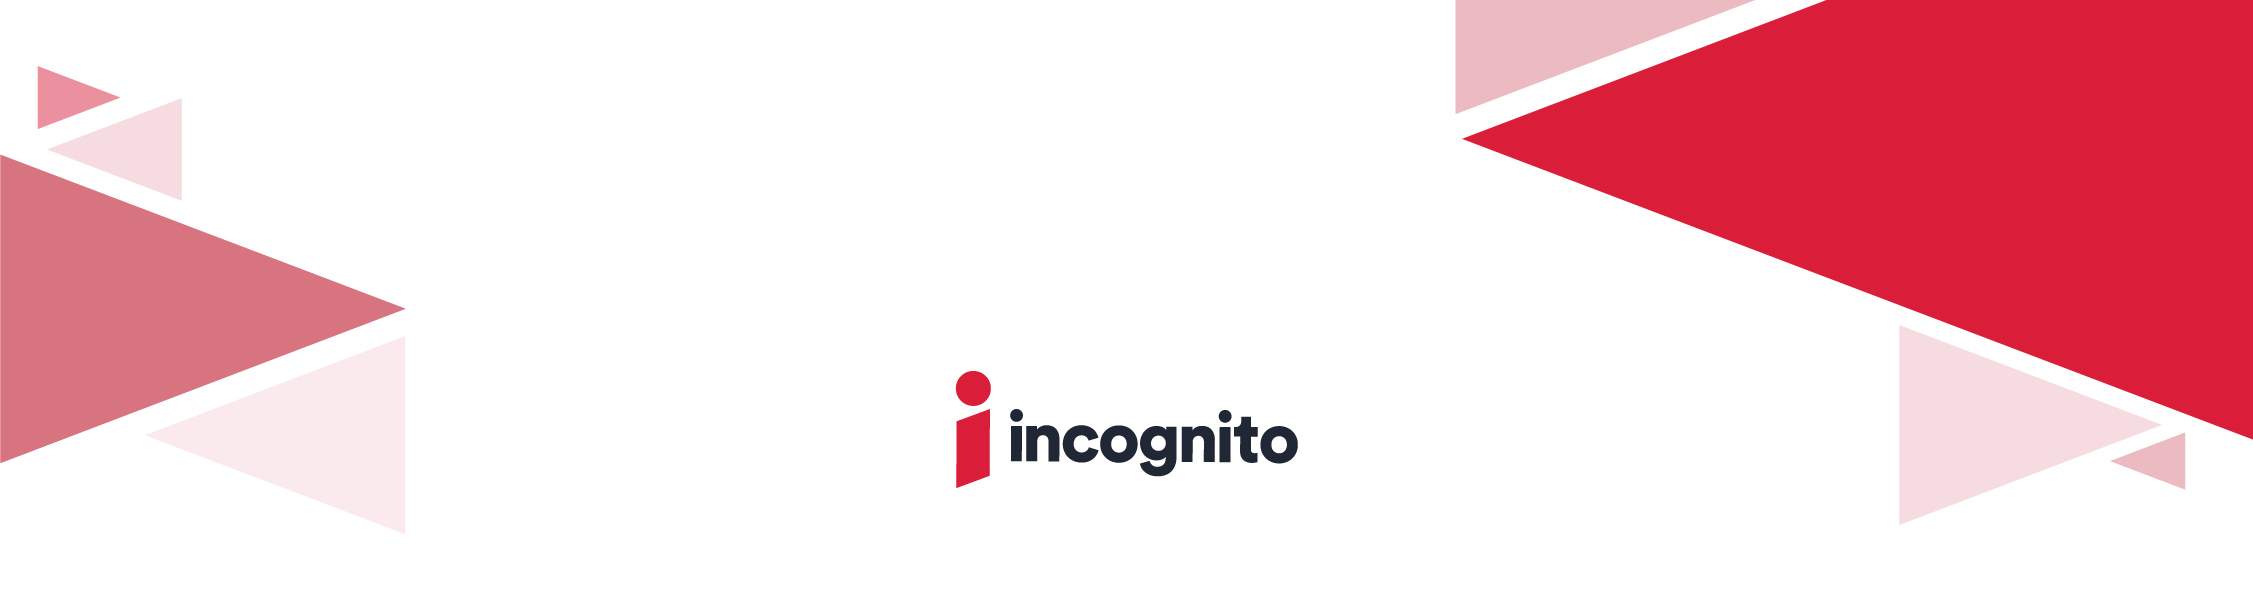 Incognito_customer_network_experience_hub_banner